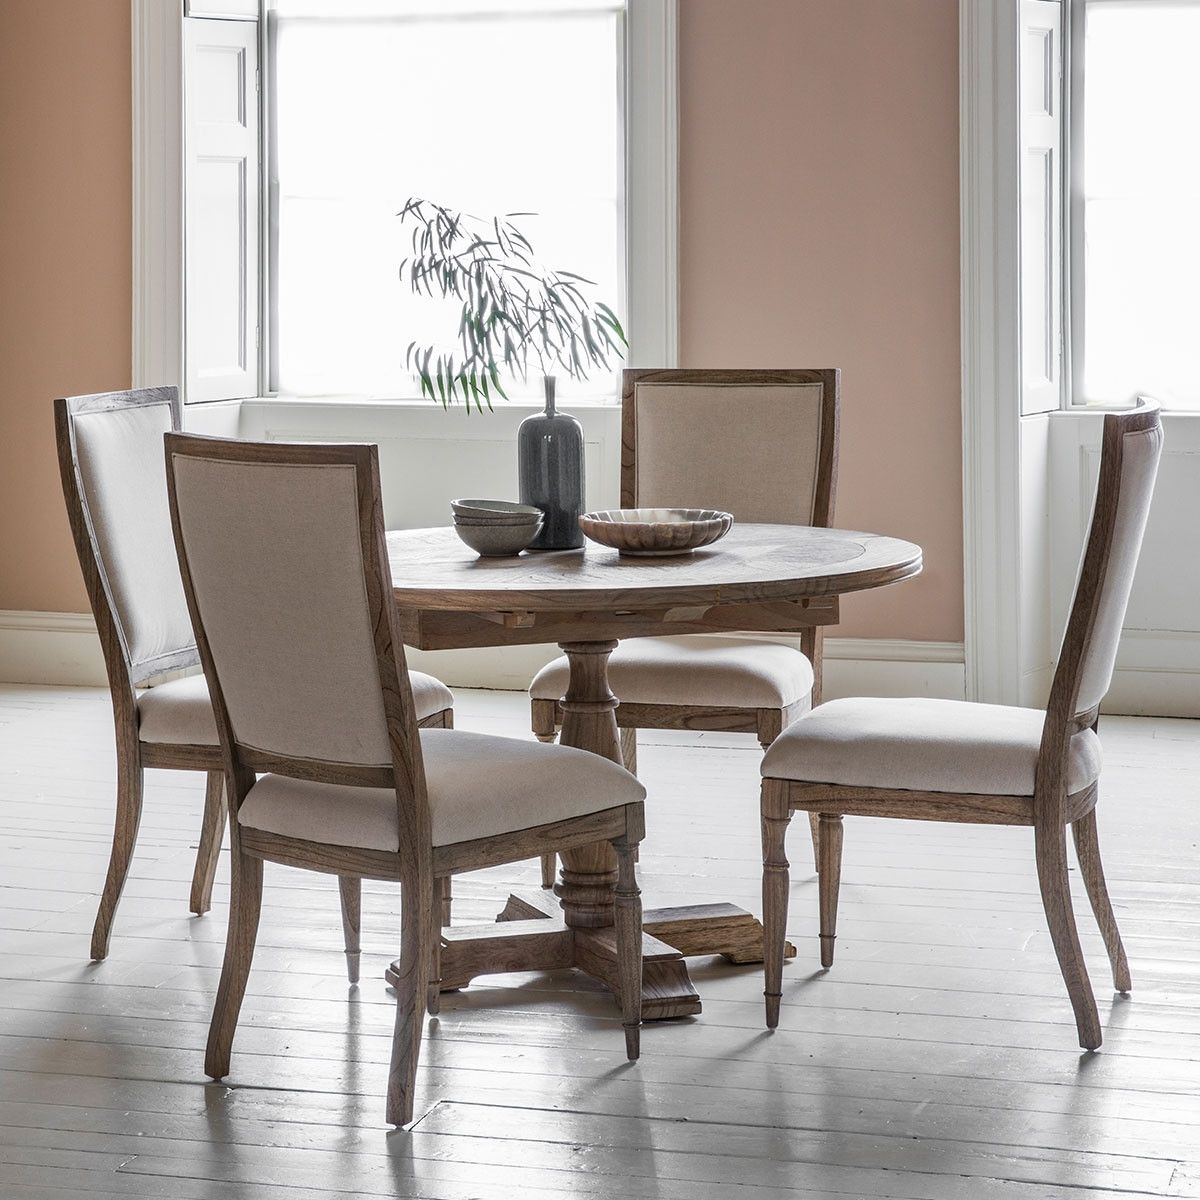 Most Recent Bordeaux Mindy Wood Round Extending Dining Table & 4 Chairs Throughout Bordeaux Dining Tables (View 18 of 25)